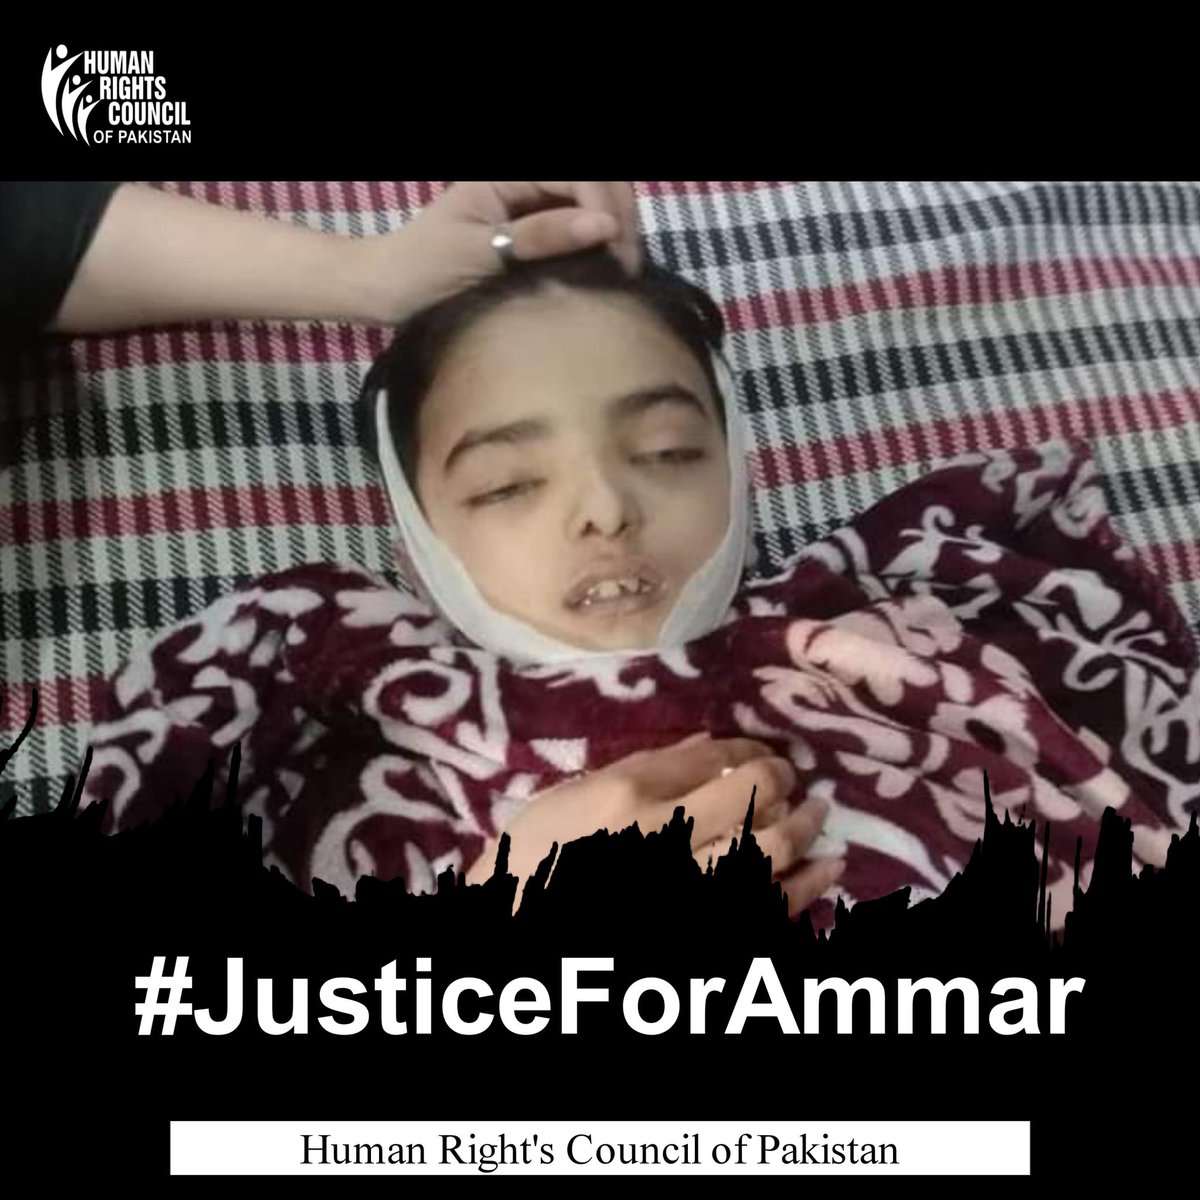 In Pakistan, a small innocent child, Ammar, passed away while waiting for his father. Ammar's father, Mian Ibad Farooq, is in jail for being named in a case. Ammar became mentally ill after his father's arrest.The police and law enforcement agencies raided Ammar's house to arrest